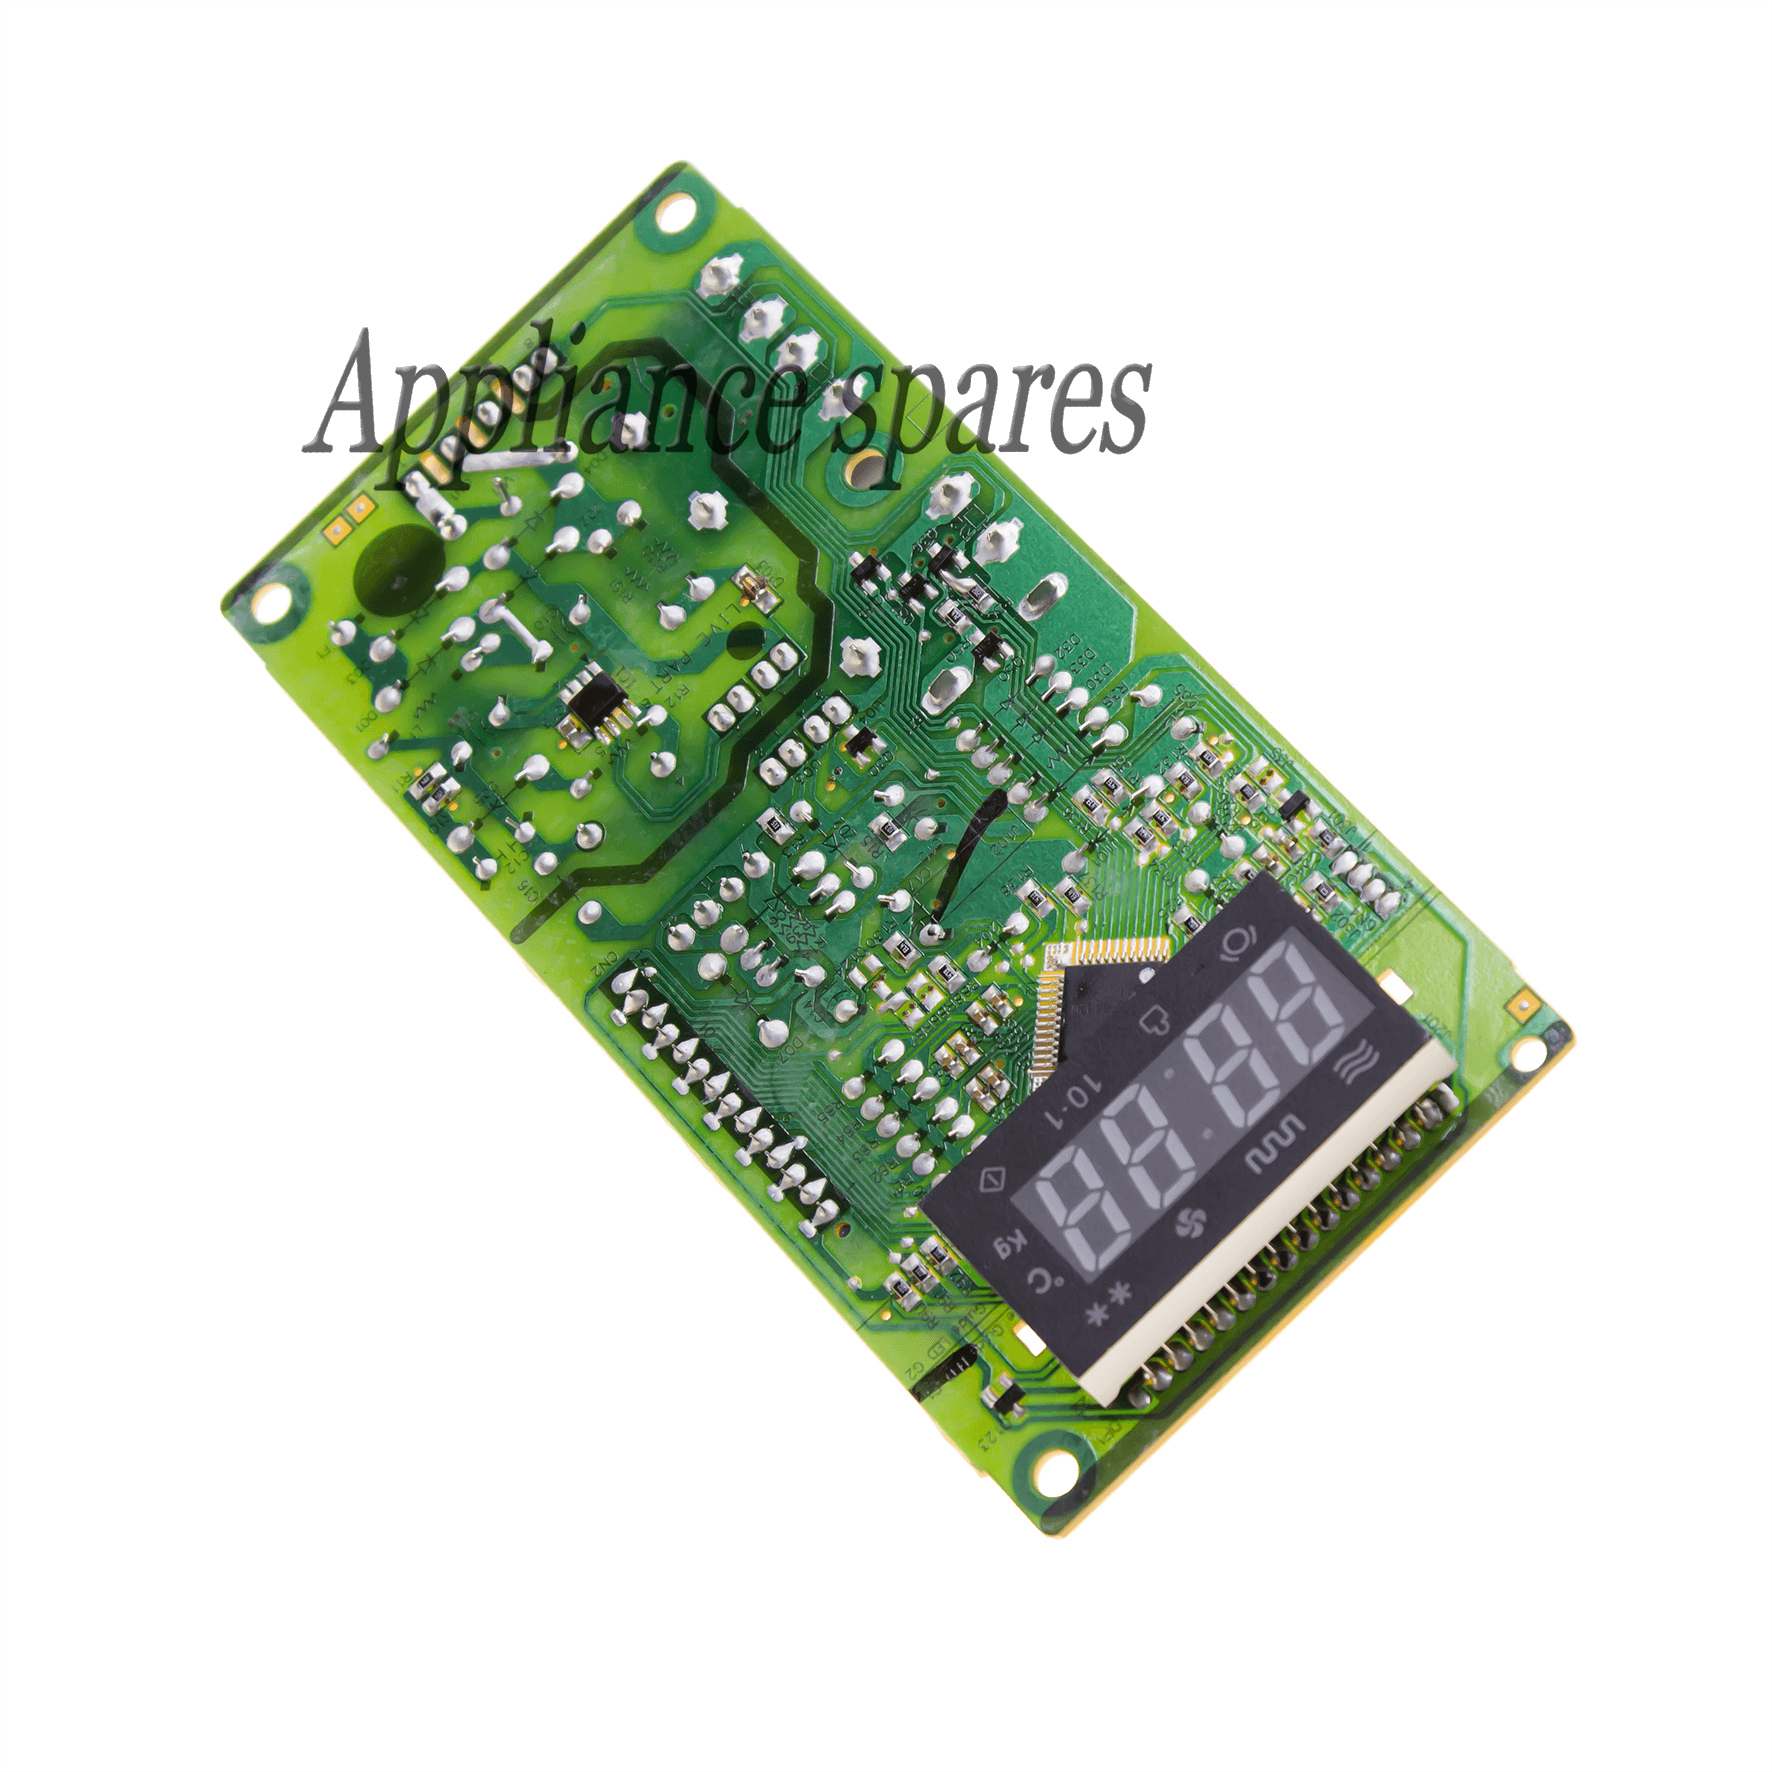 LG Microwave Oven Pc Board